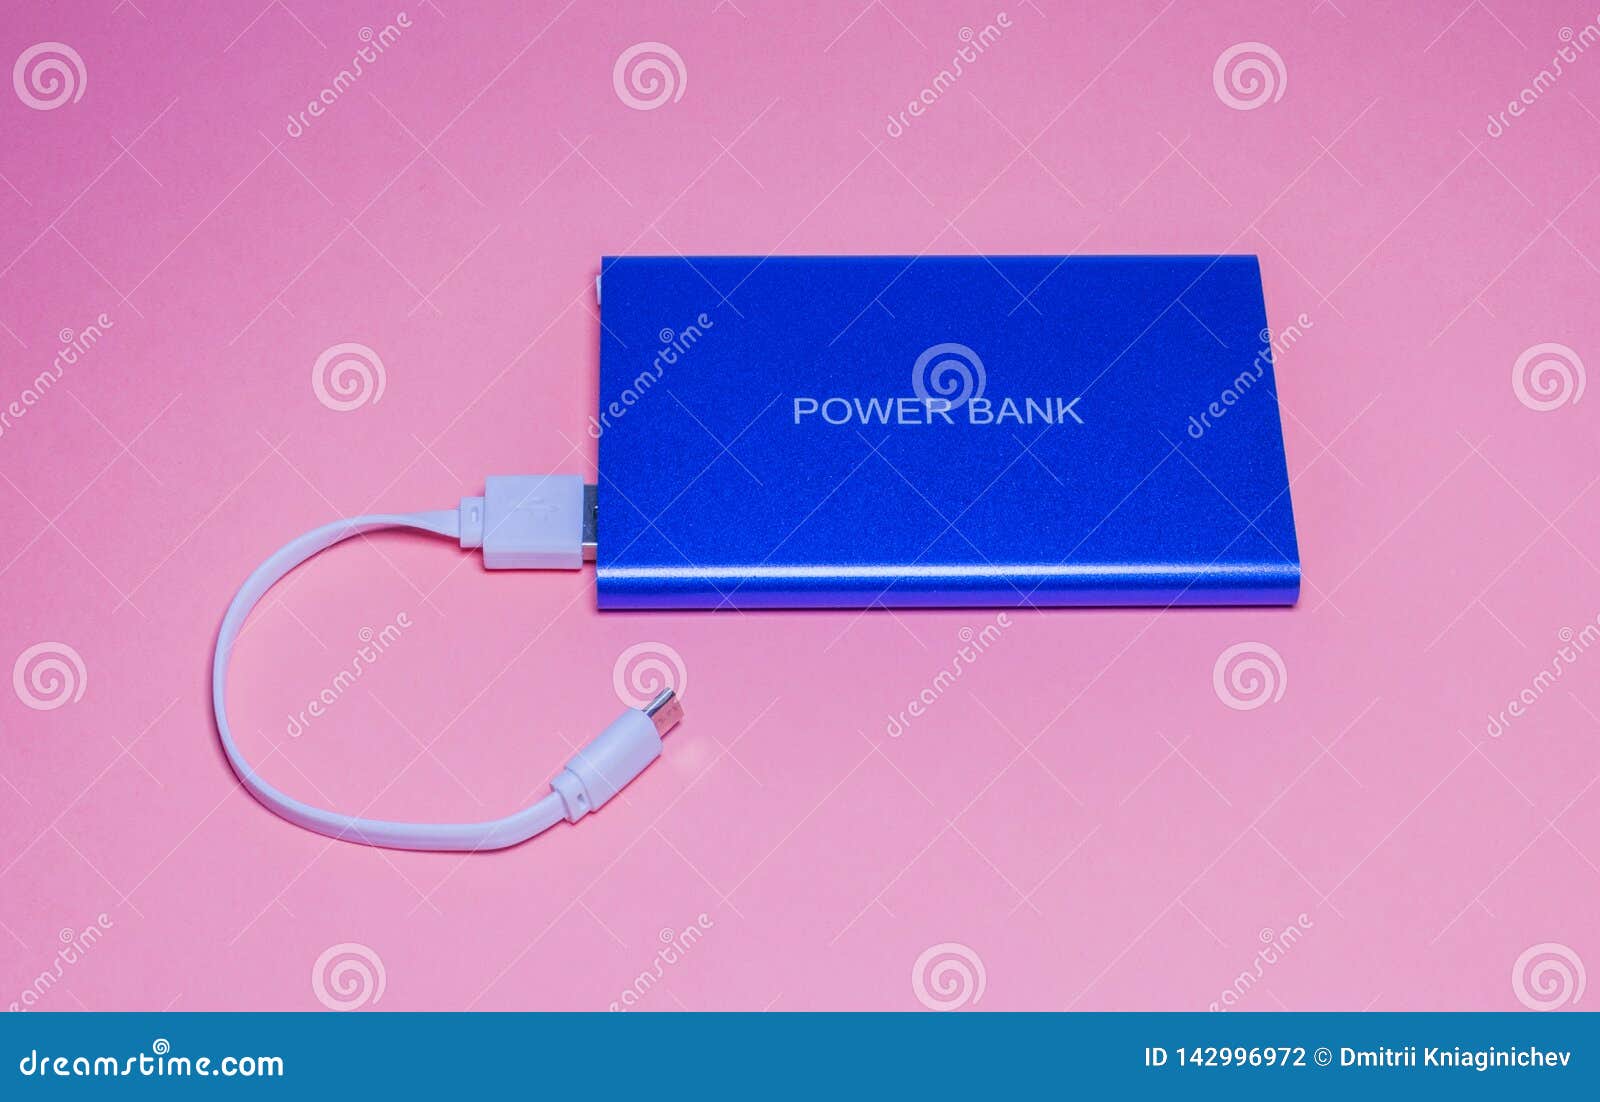 Power bank for charge telephone on pink background-image. R Luz artificial